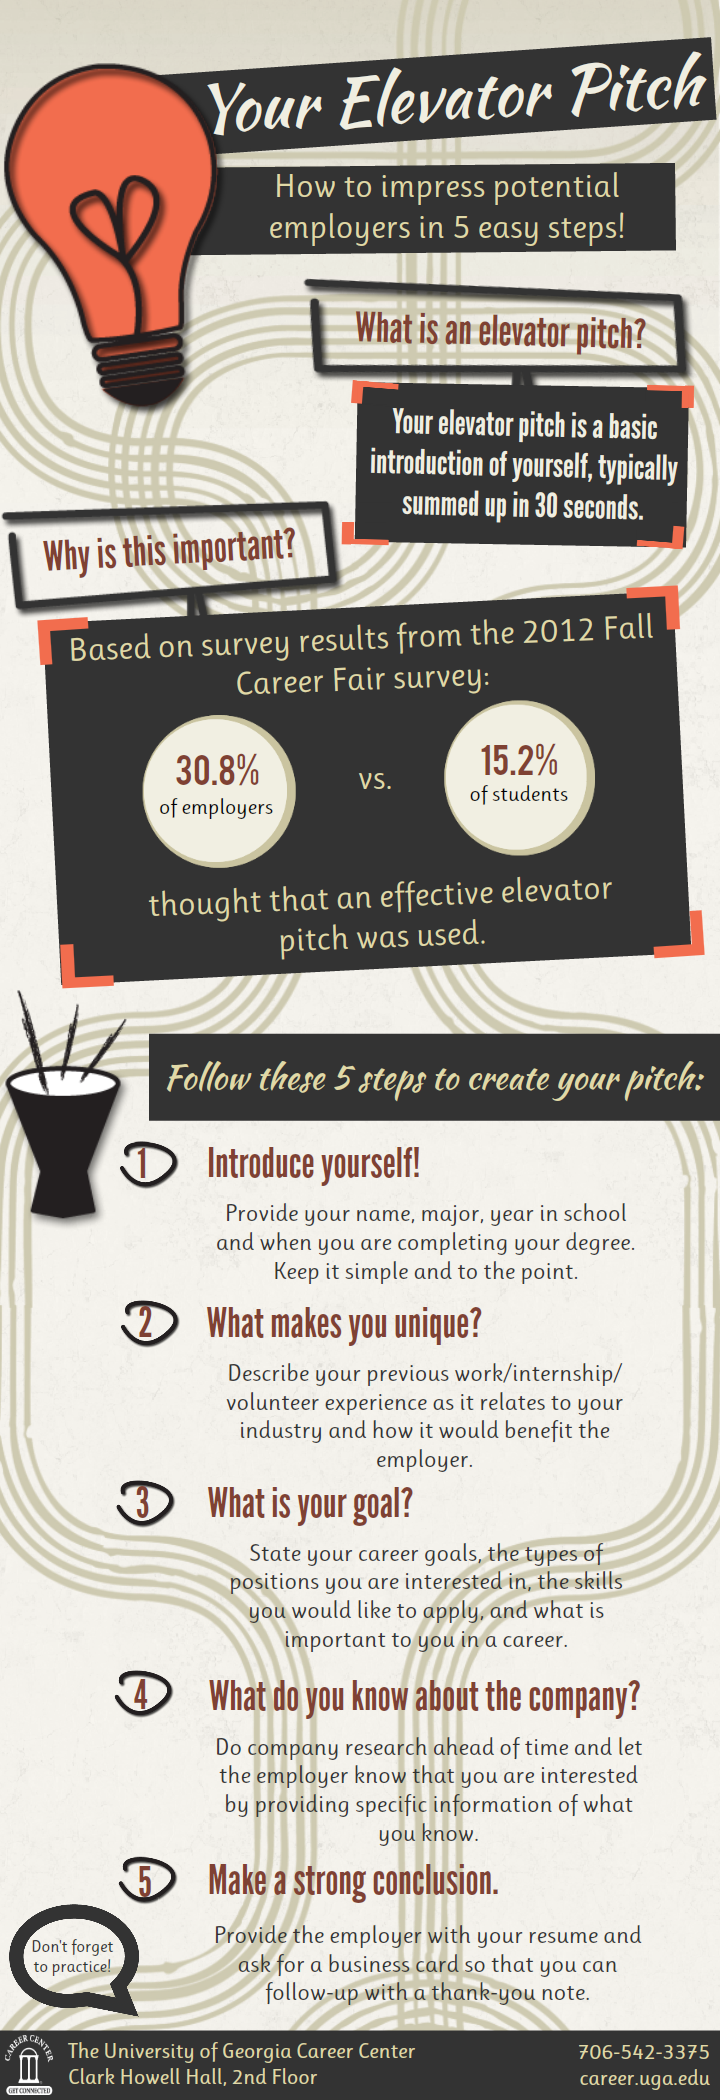 Top 5 Tips to Impress Employers and Get Hired [INFOGRAPHIC]